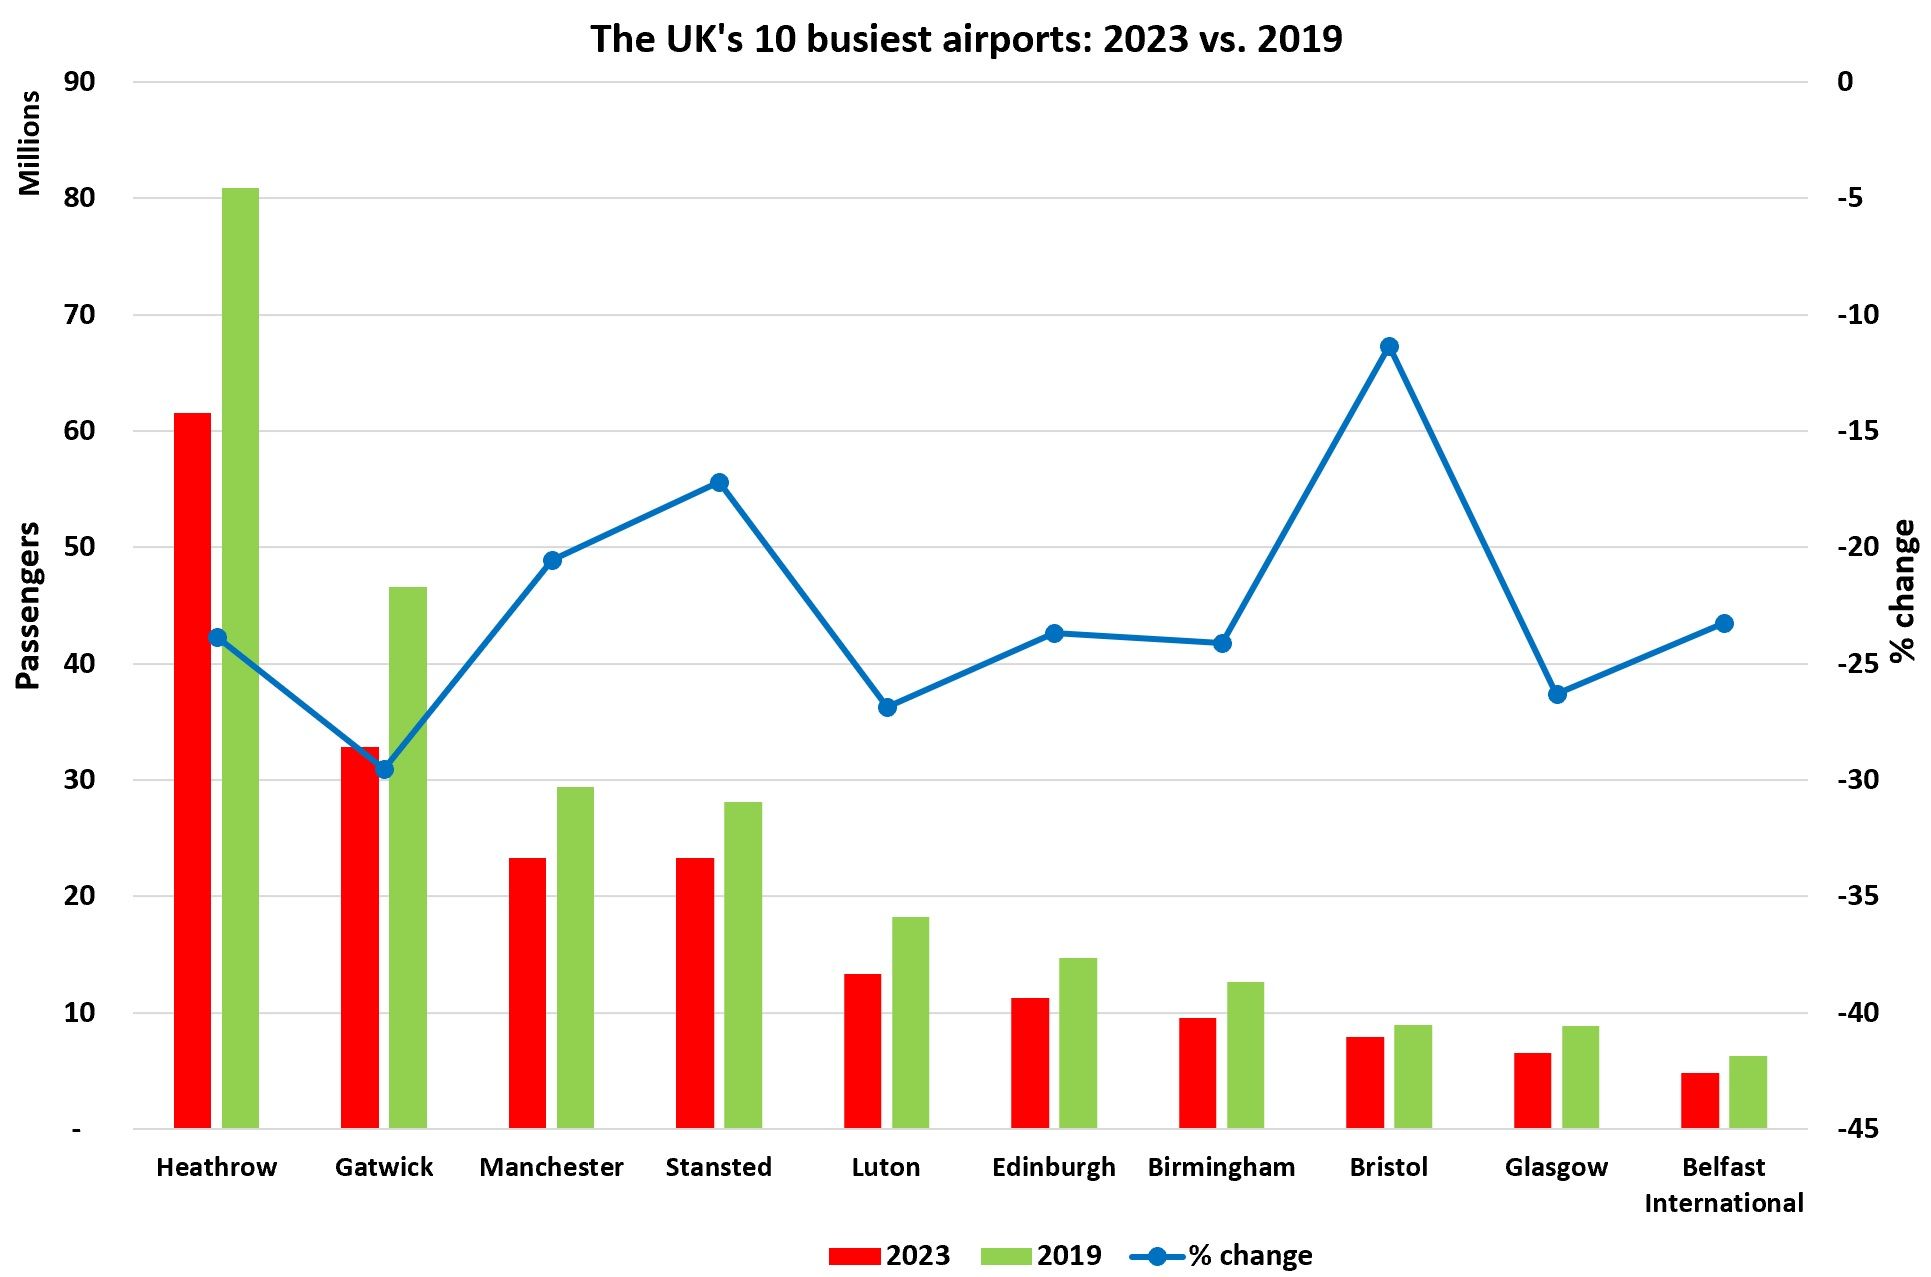 The UK's 10 busiest airports in 2023